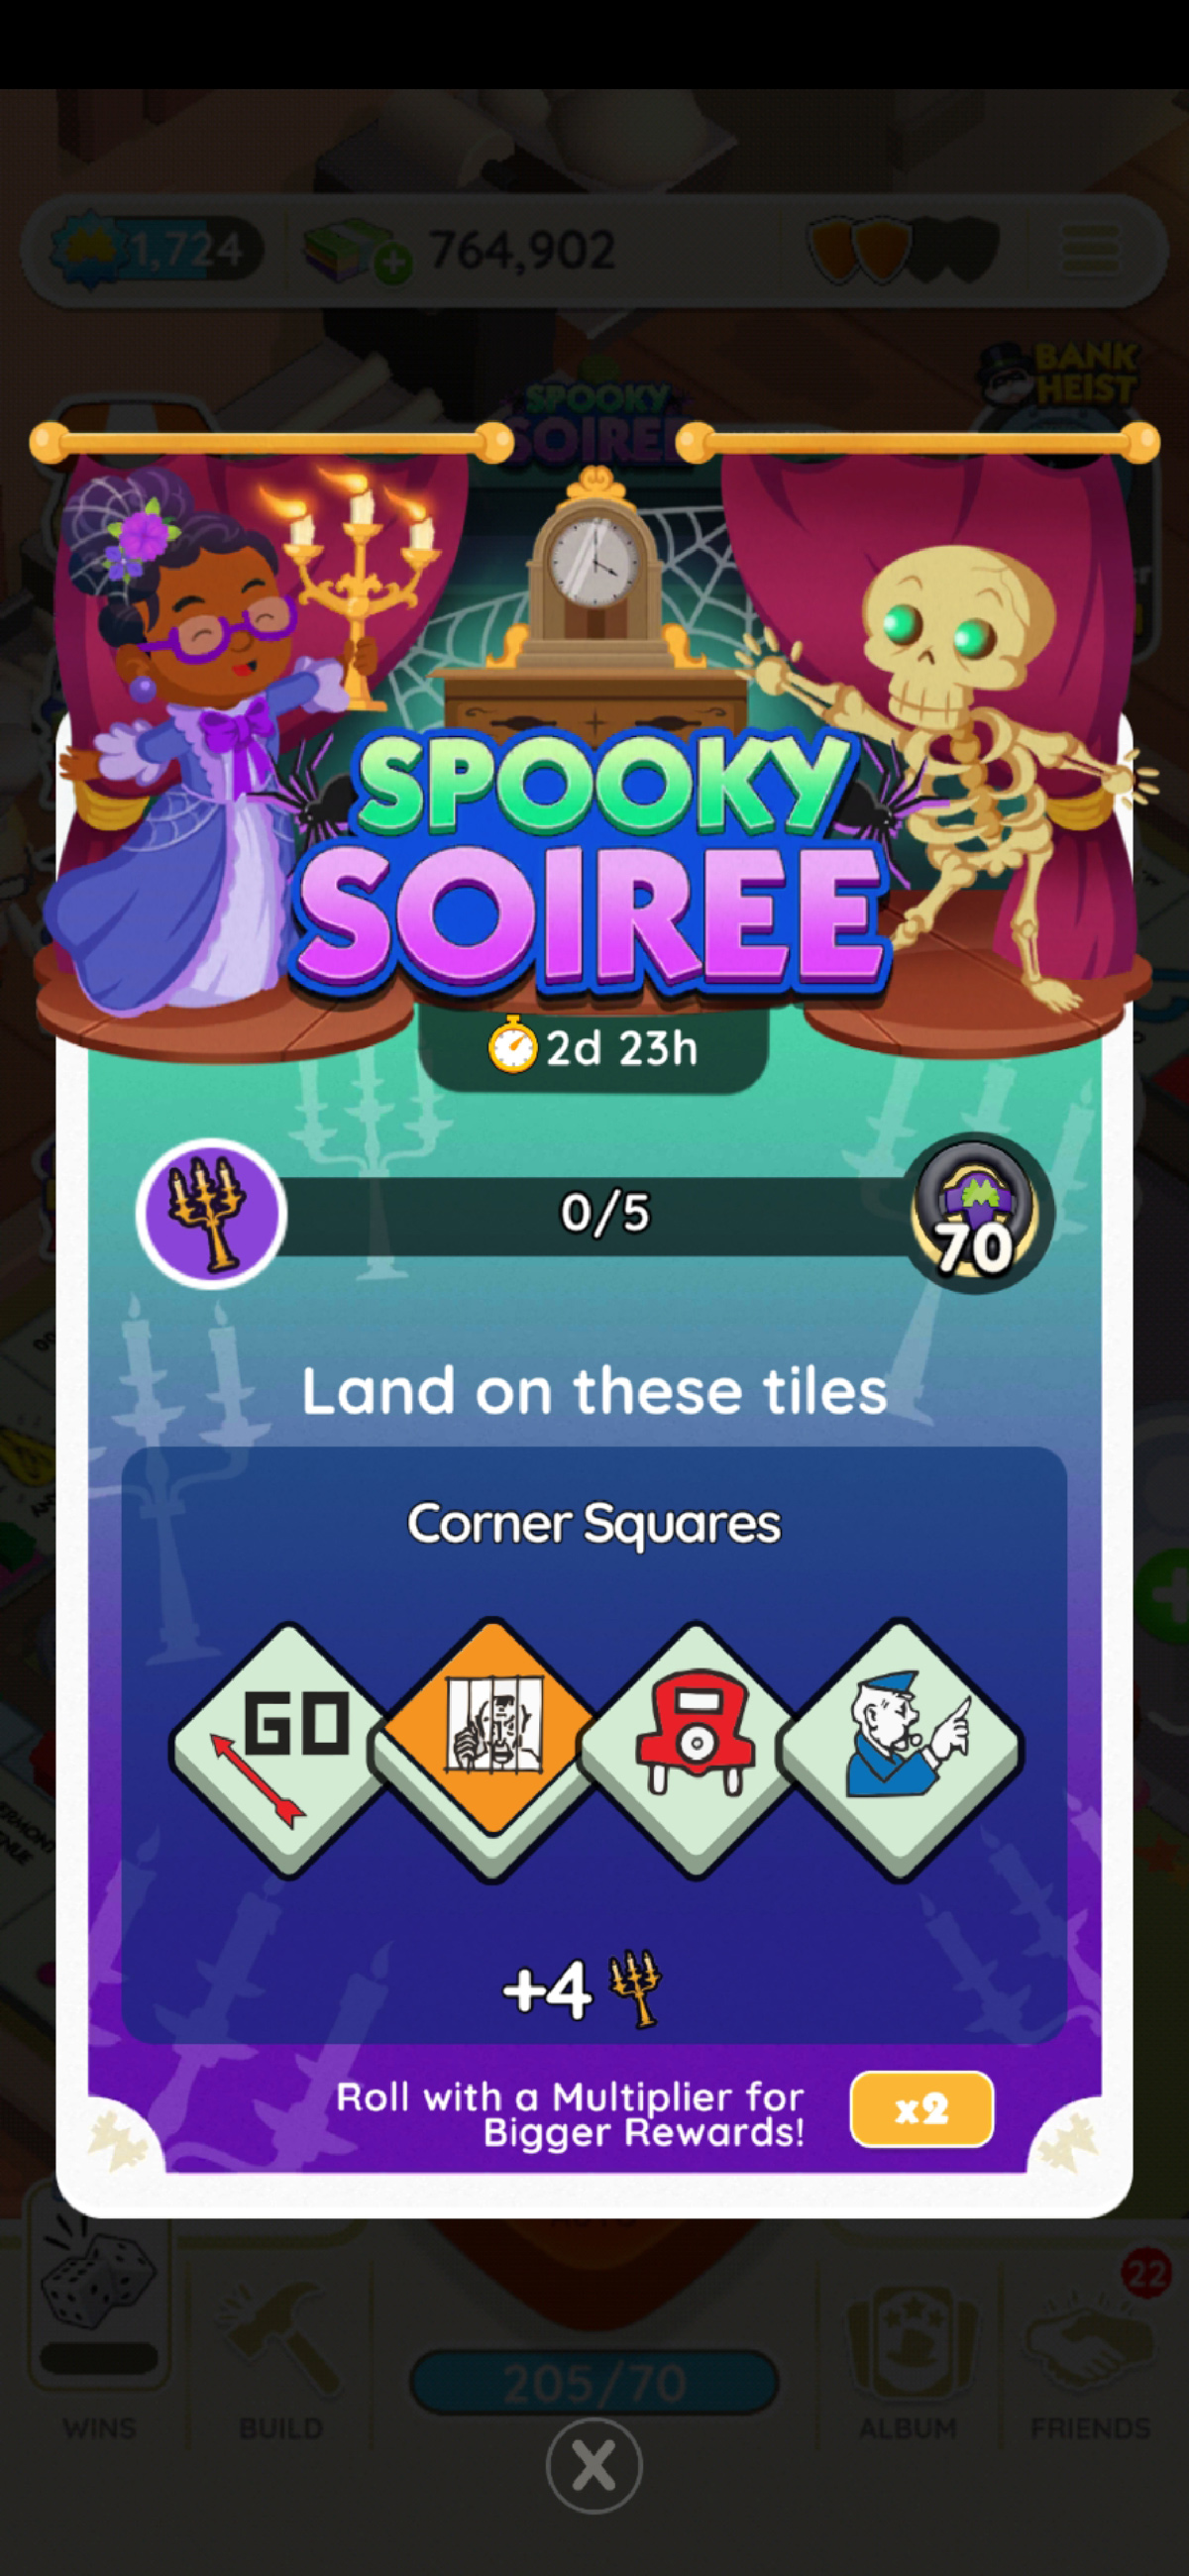 An image showing how the Spooky Soiree event works in Monopoly GO as part of an article on that subject, as well as the rewards, milestones, and how to win. The image itself shows the tiles requires for the event as well as a woman holding a candlestick and a skeleton on either side of a mantle clock.